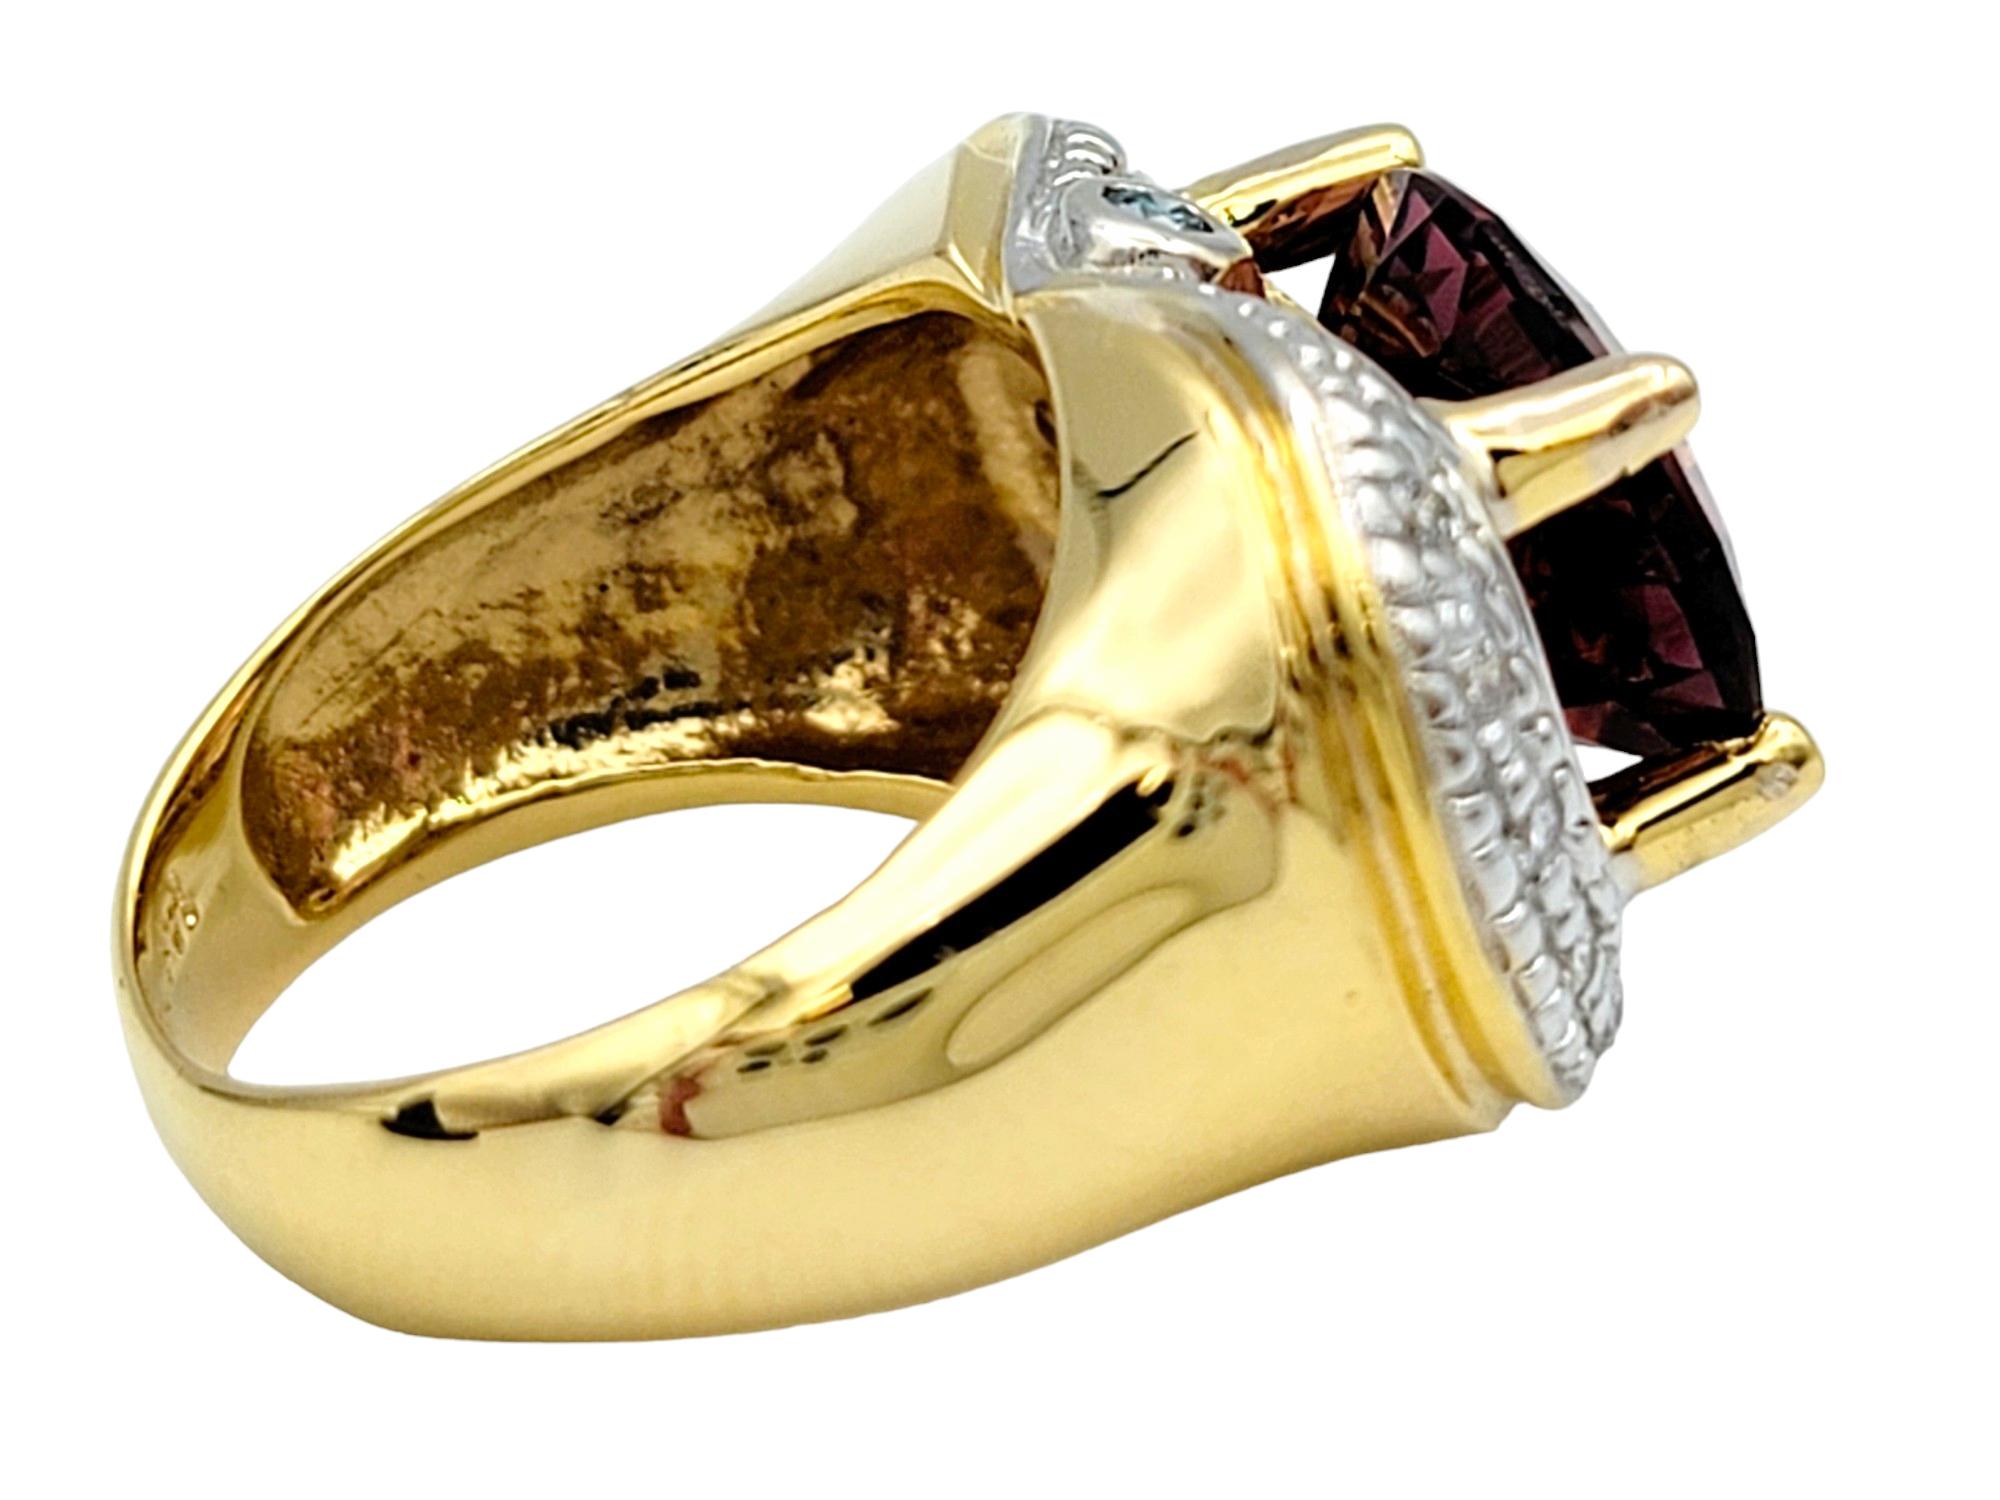 Oval Pink Tourmaline and Diamond Halo Ring Set in 14 Karat White and Yellow Gold In Good Condition For Sale In Scottsdale, AZ